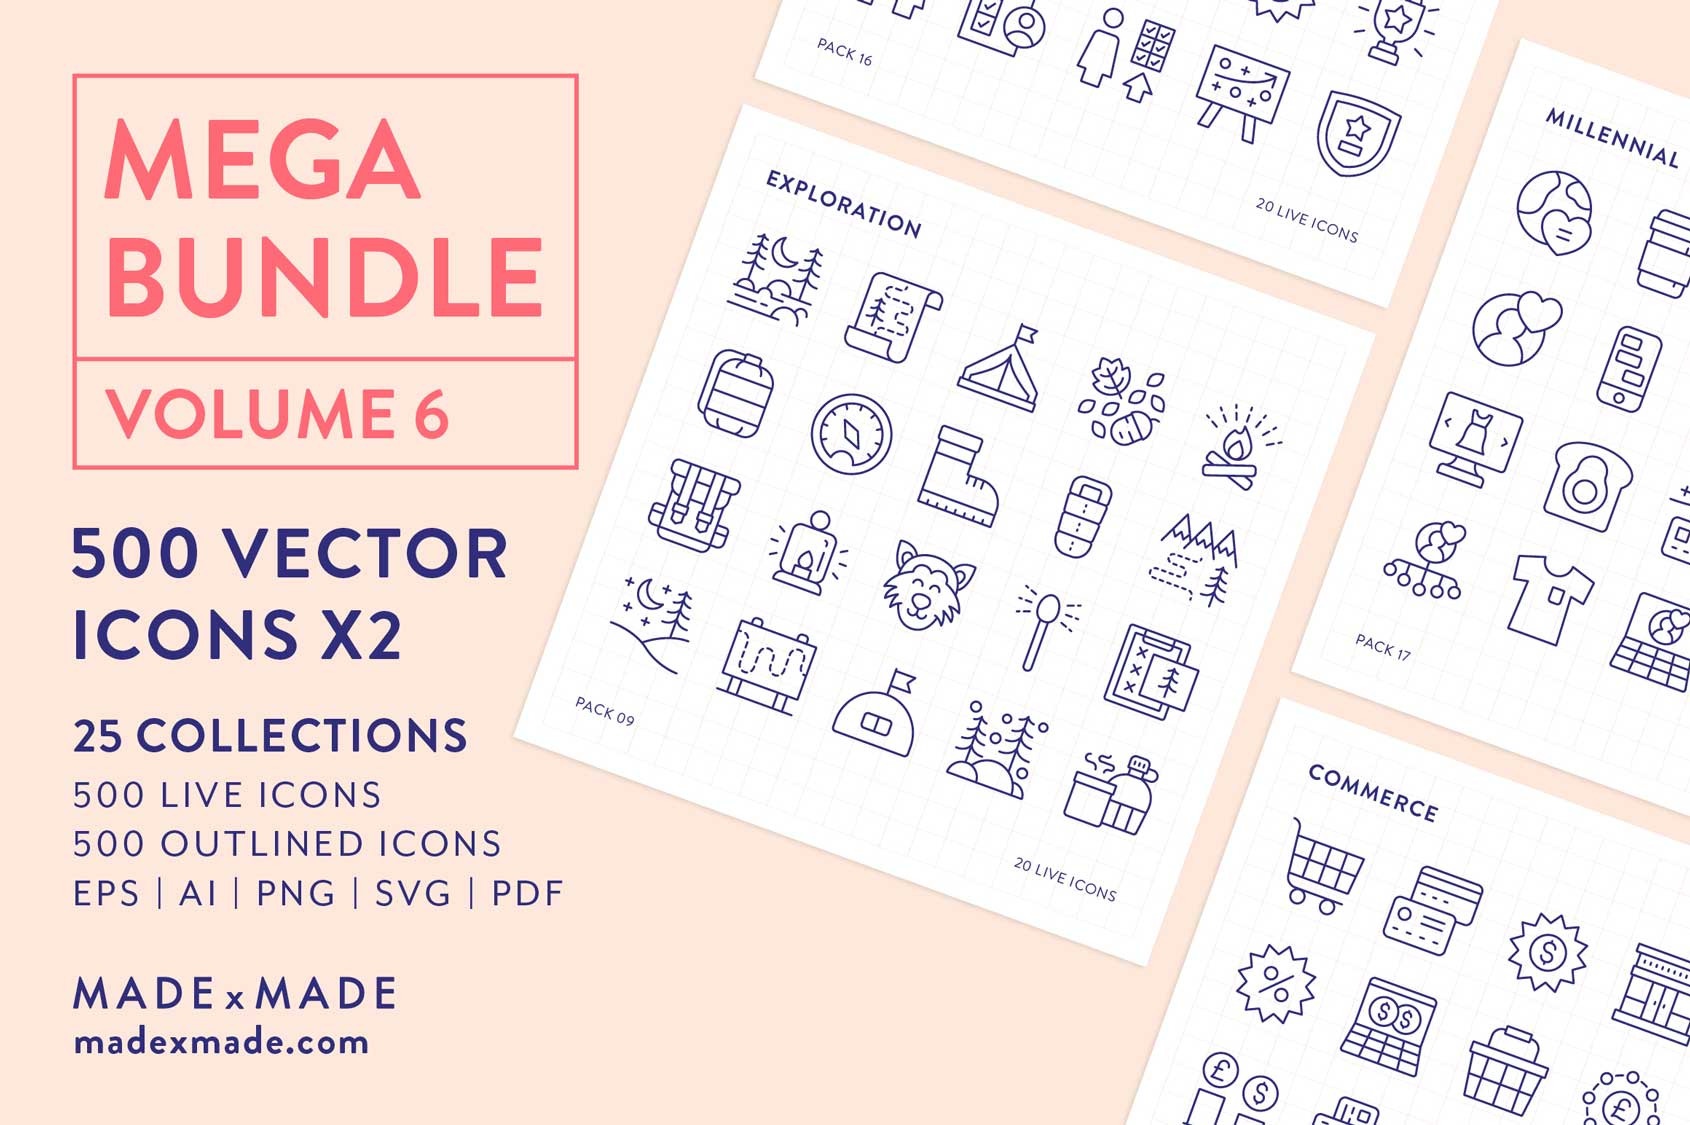 made x made icons – Mega Bundle Vol 6 – A consistent icon package of downloadable icons and symbols for 25 popular collections - cover